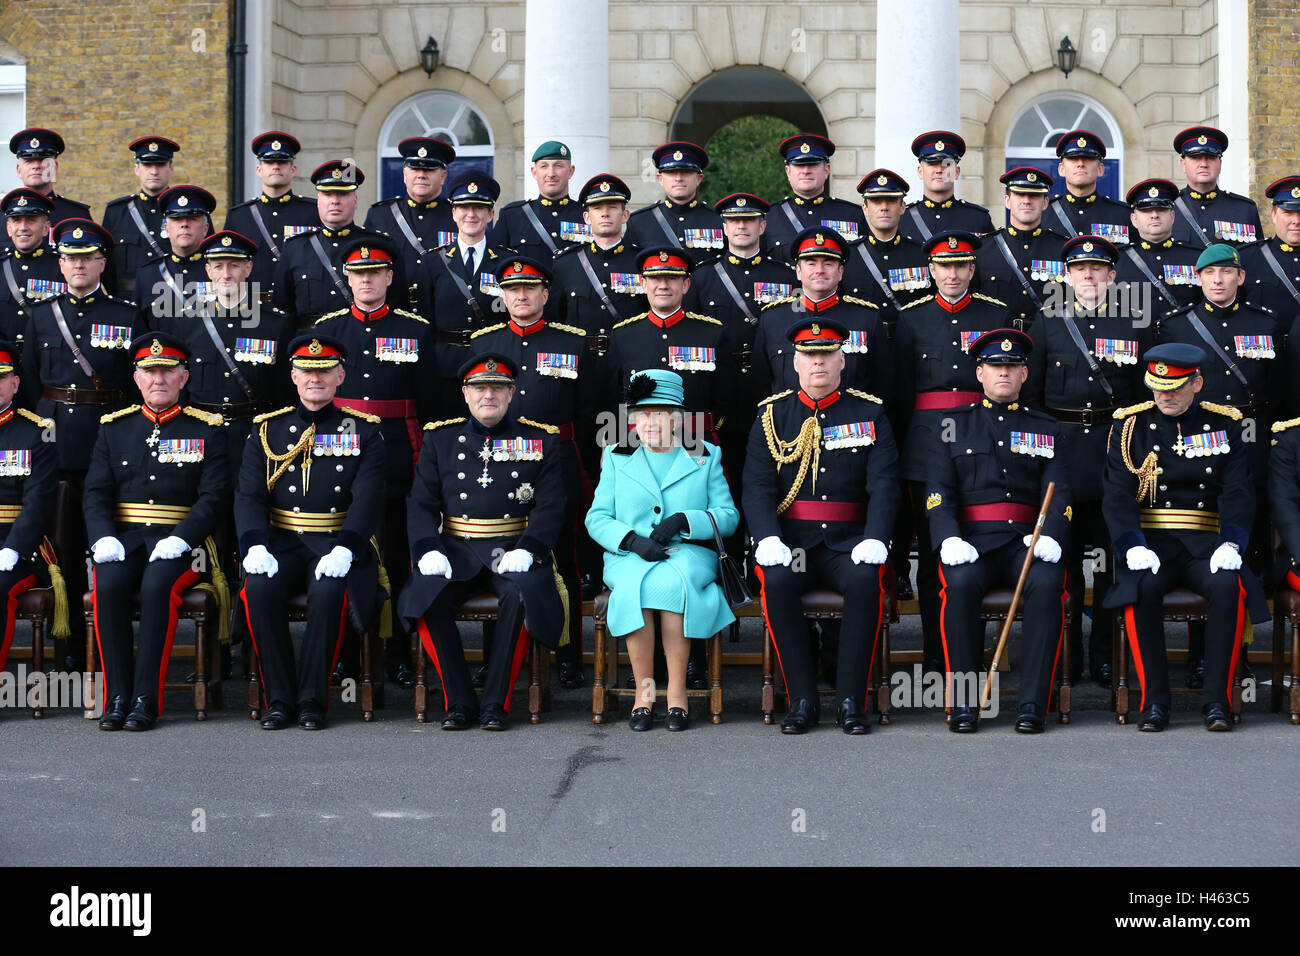 Queen Elizabeth II poses for a group photograph during a visit to the Corps of Royal Engineers at Brompton Barracks in Chatham, Kent, to celebrate their 300th anniversary. Stock Photo